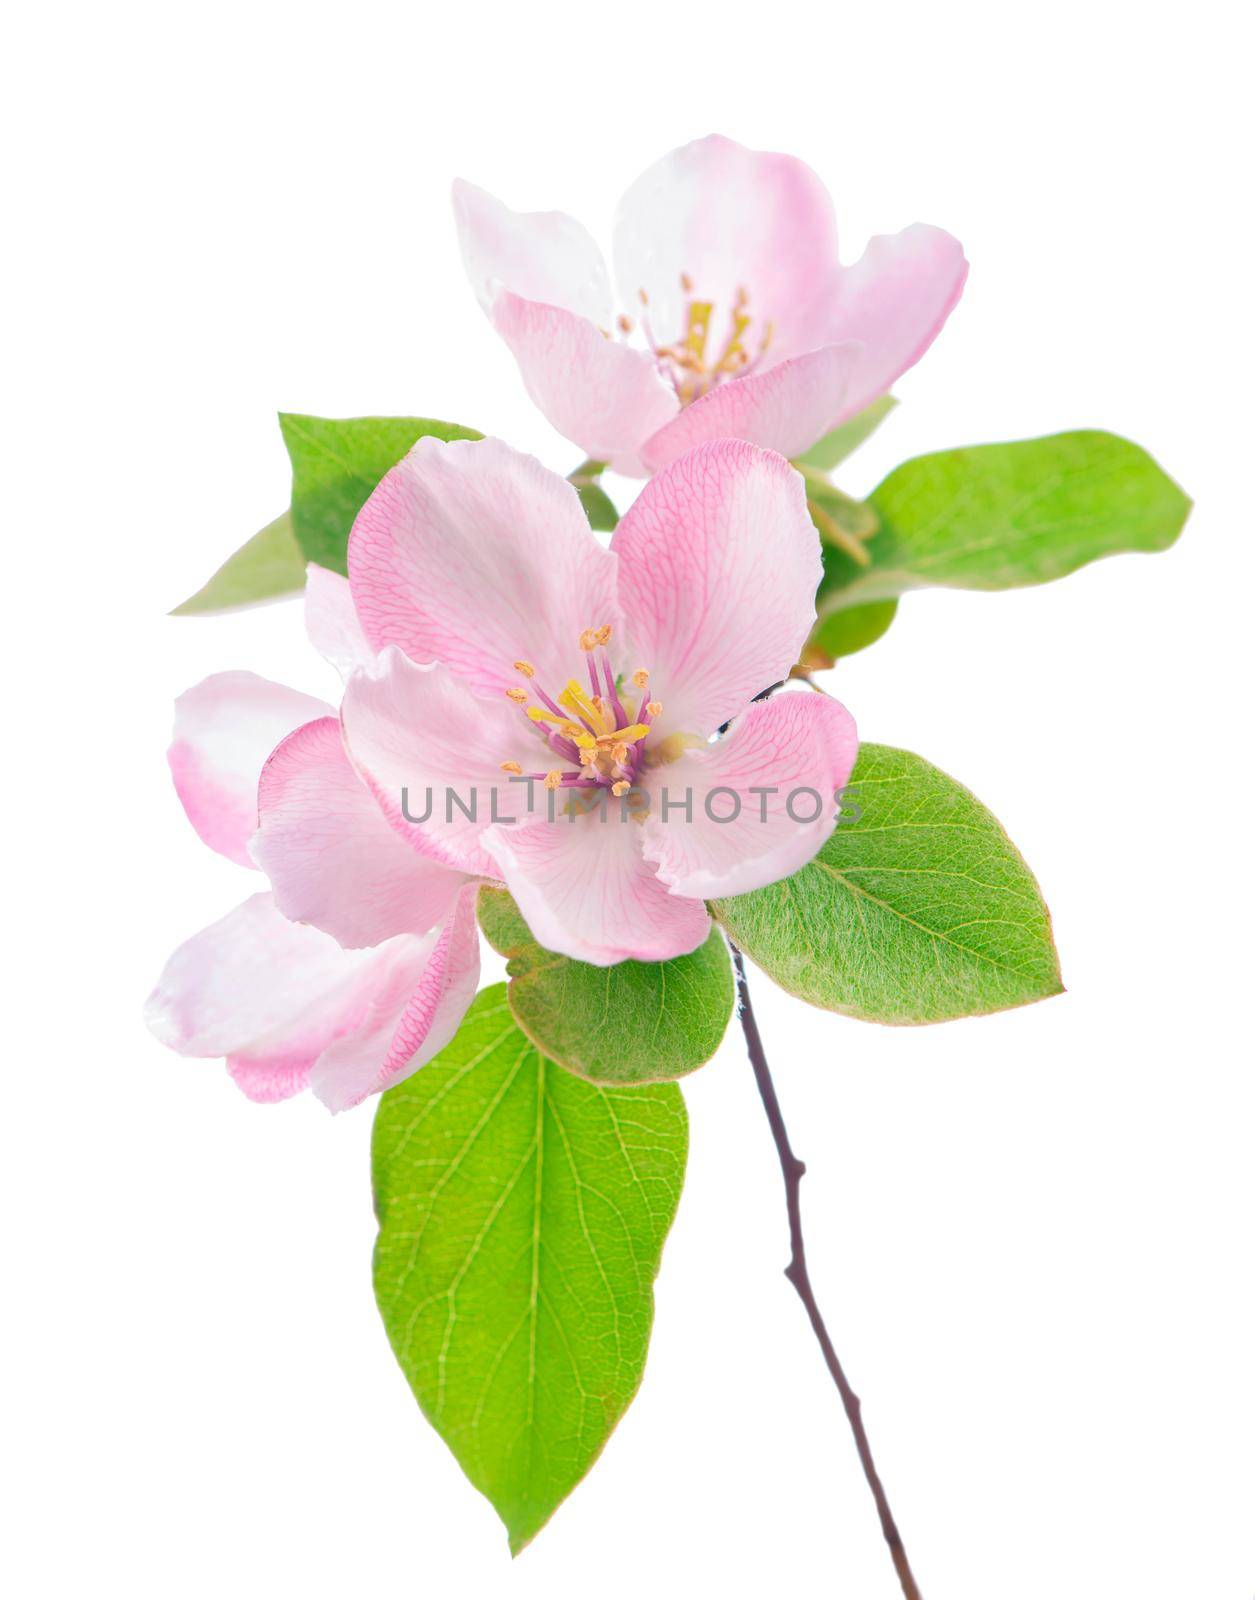 White apple flowers branch isolated on white background by aprilphoto